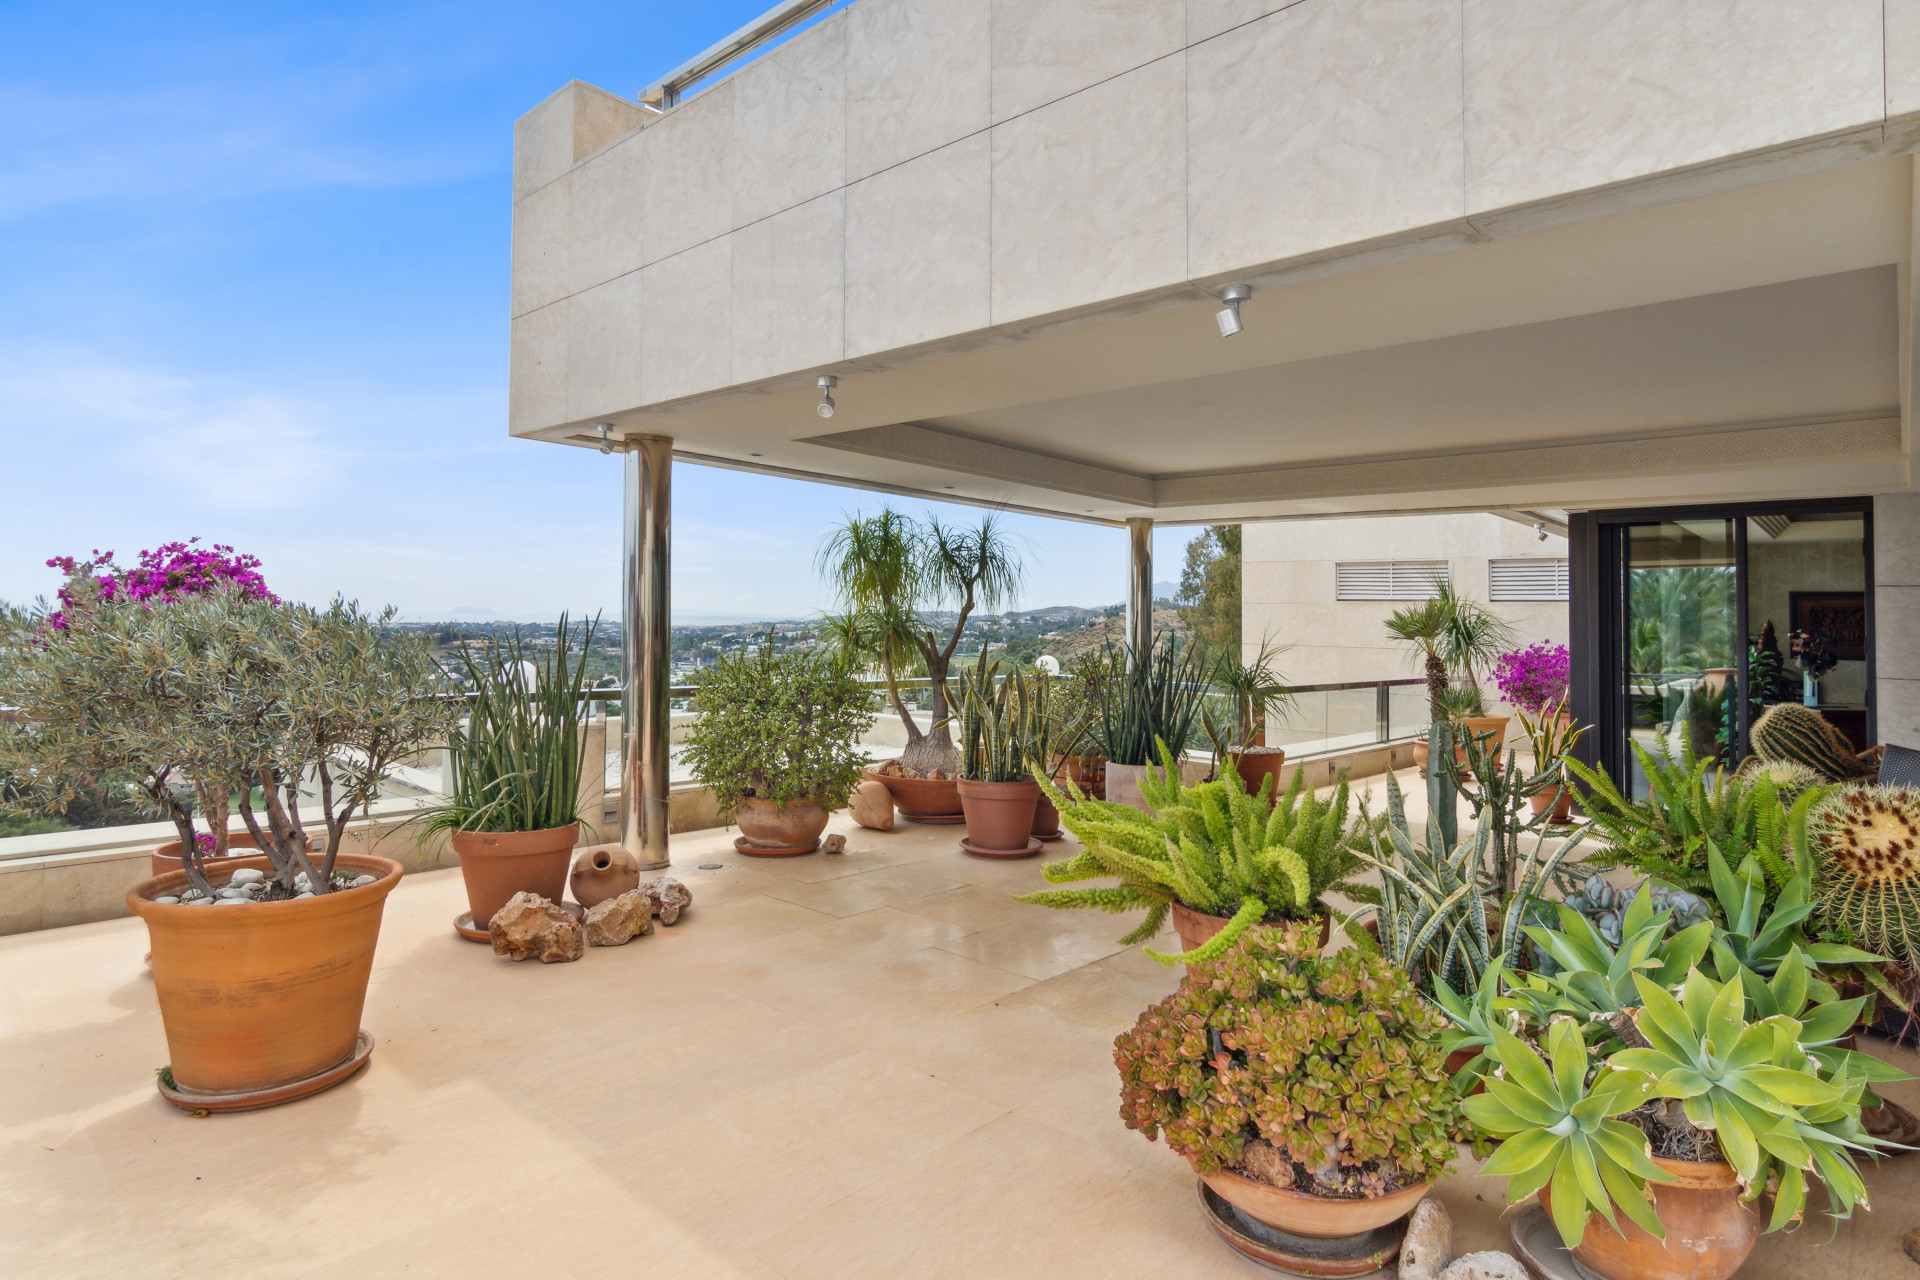 Penthouse for sale in <i>Los Arrayanes, </i>Nueva Andalucia